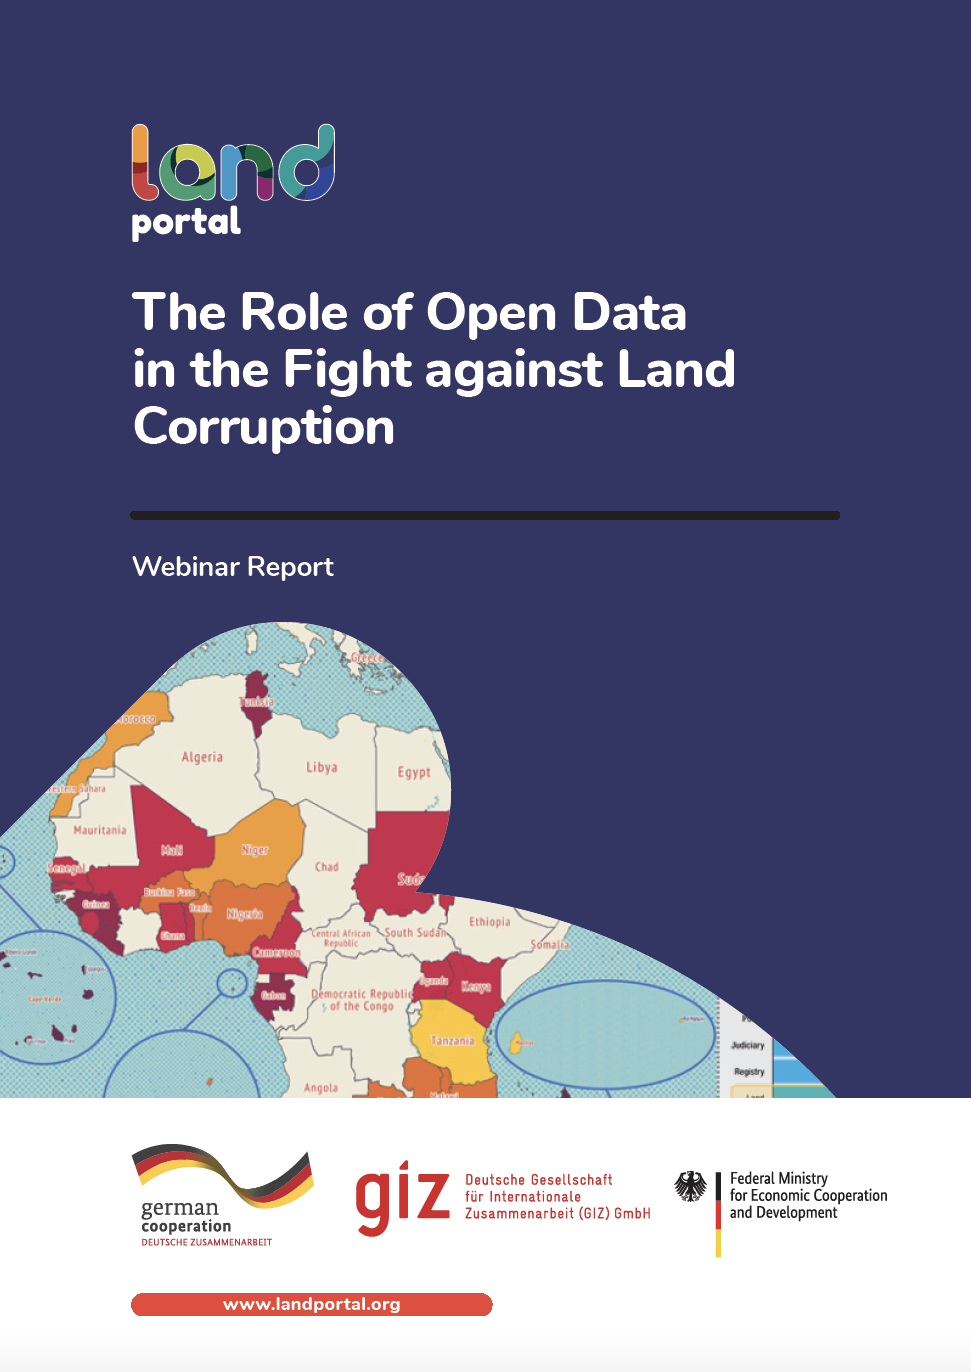 The Role of Open Data in the Fight against Land Corruption